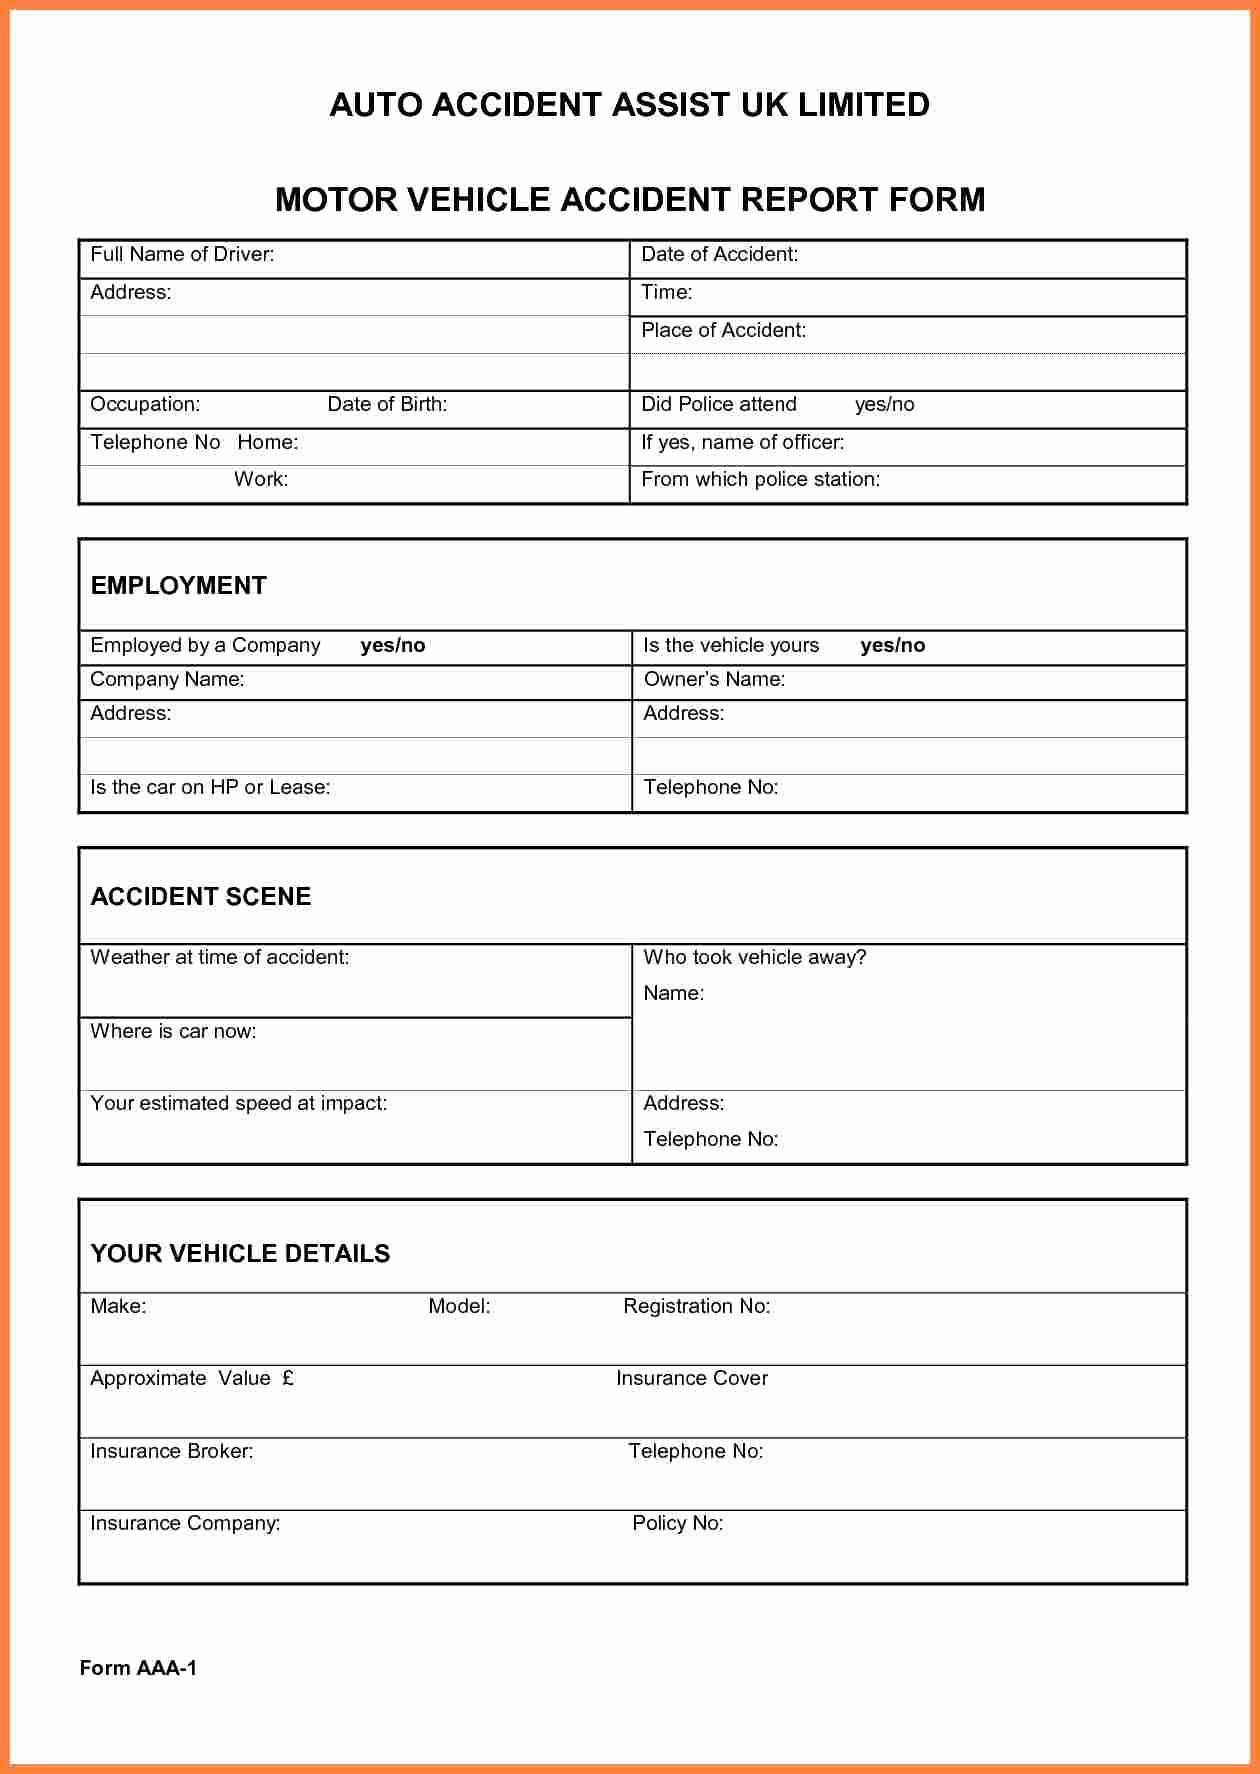 Automobile Accident Report form Template New Accident Report form Template F2ce727b0c50 Proshredelite